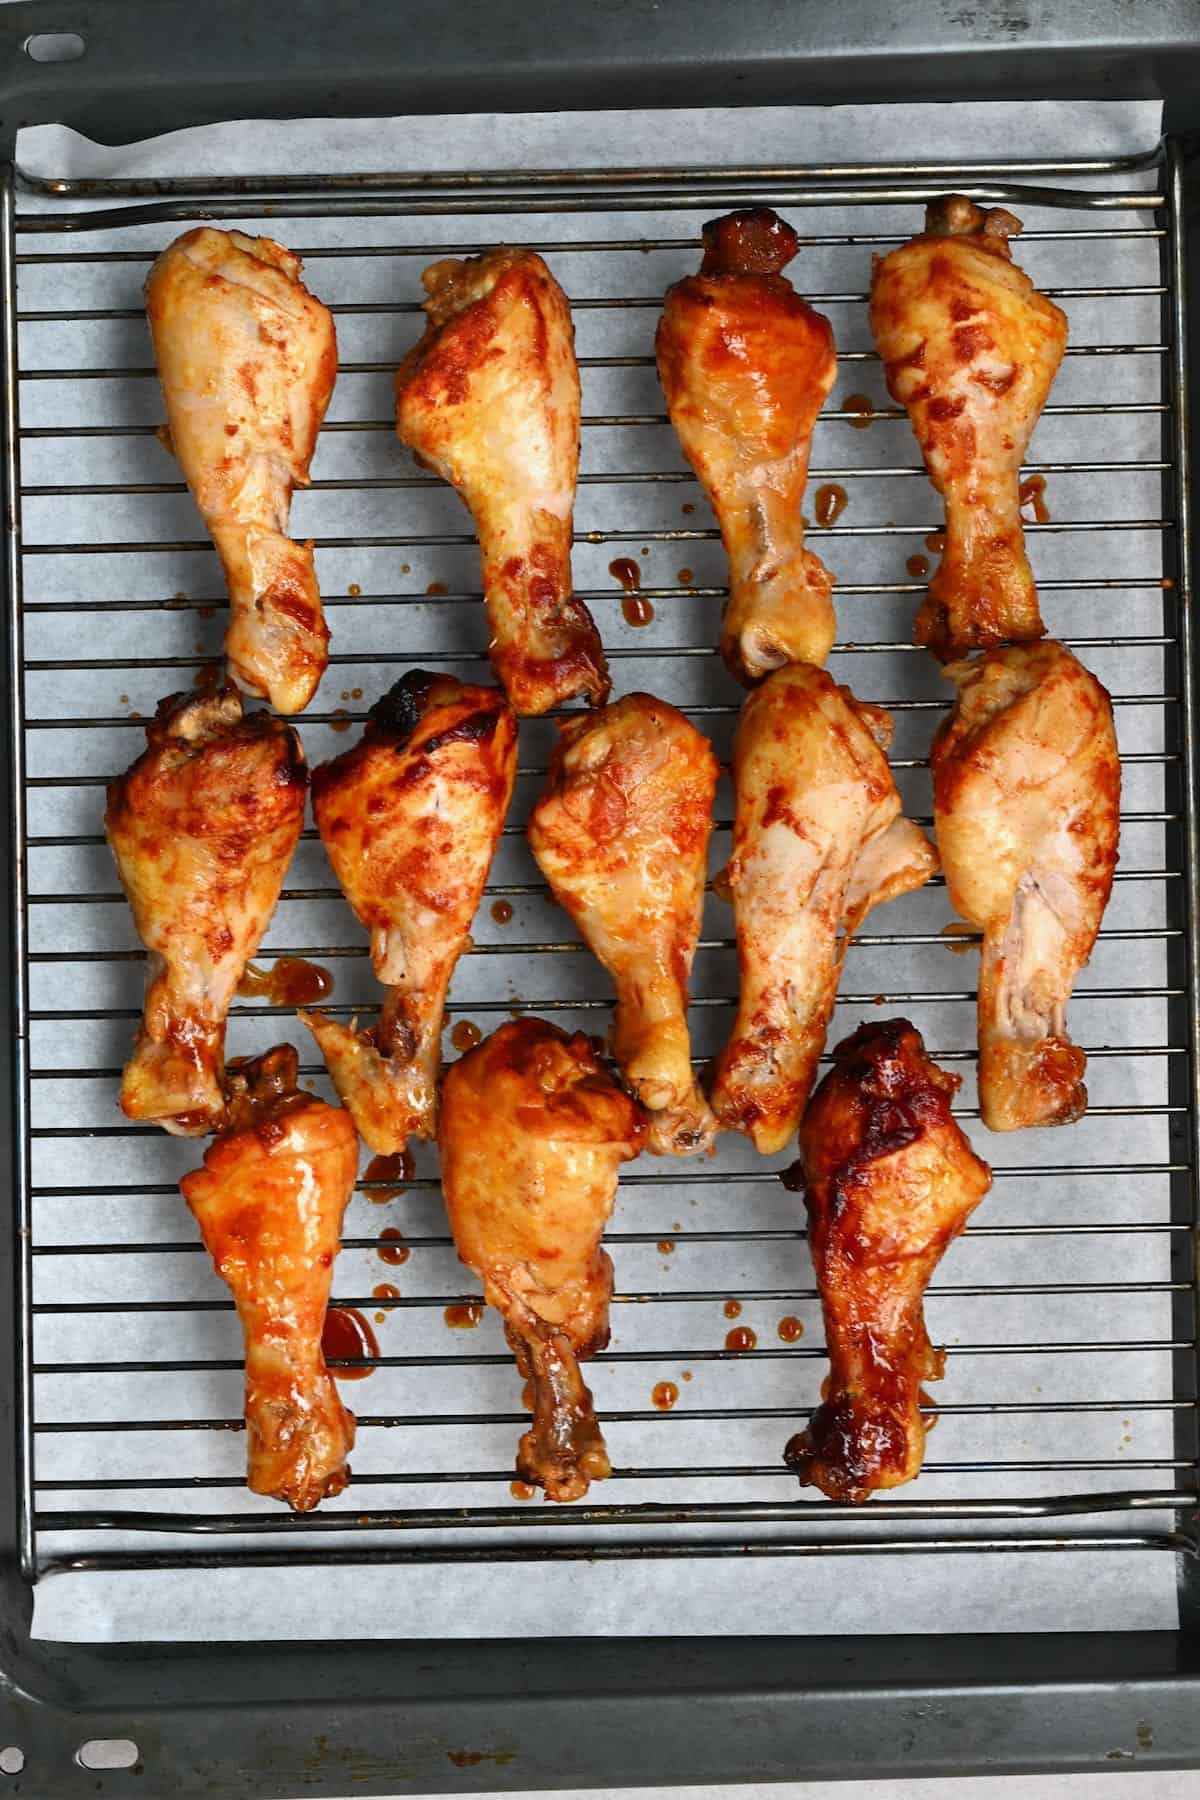 Crock pot chicken drumsticks on a baking tray before broiling